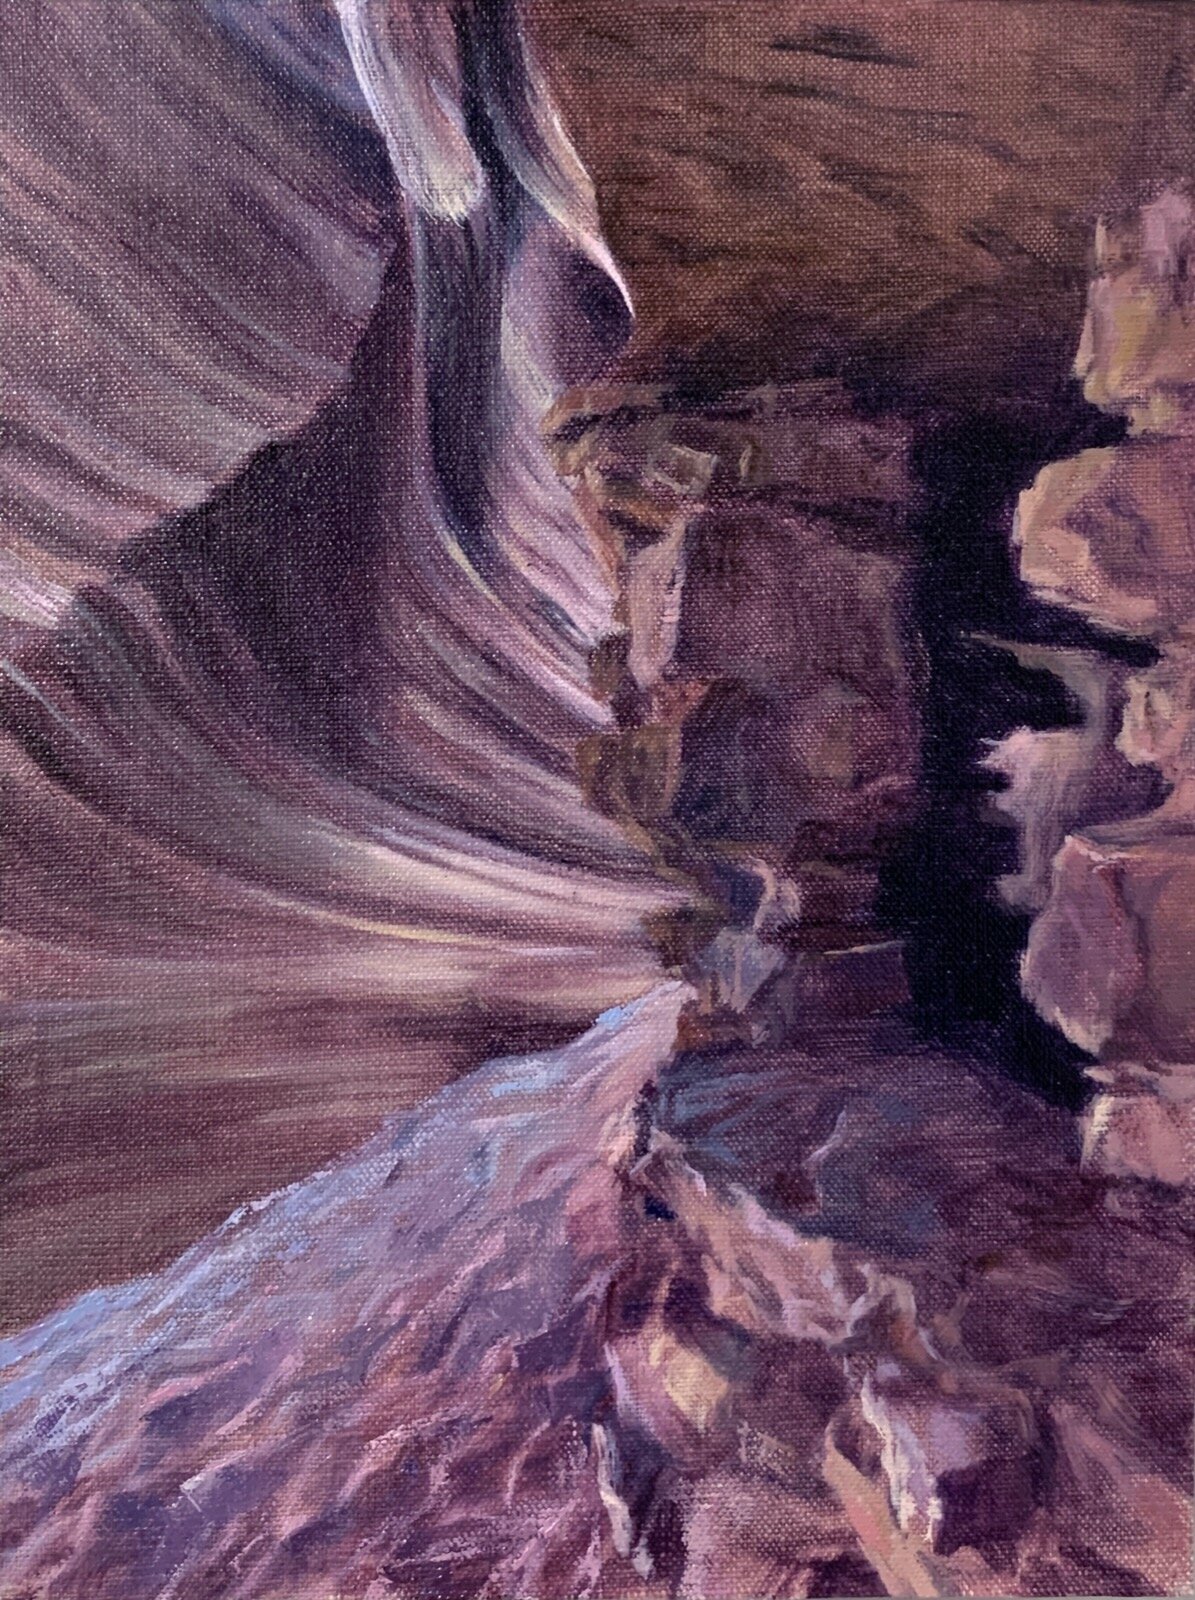   Canyonland , 2020 oil on linen on panel, 12 x 9 in 